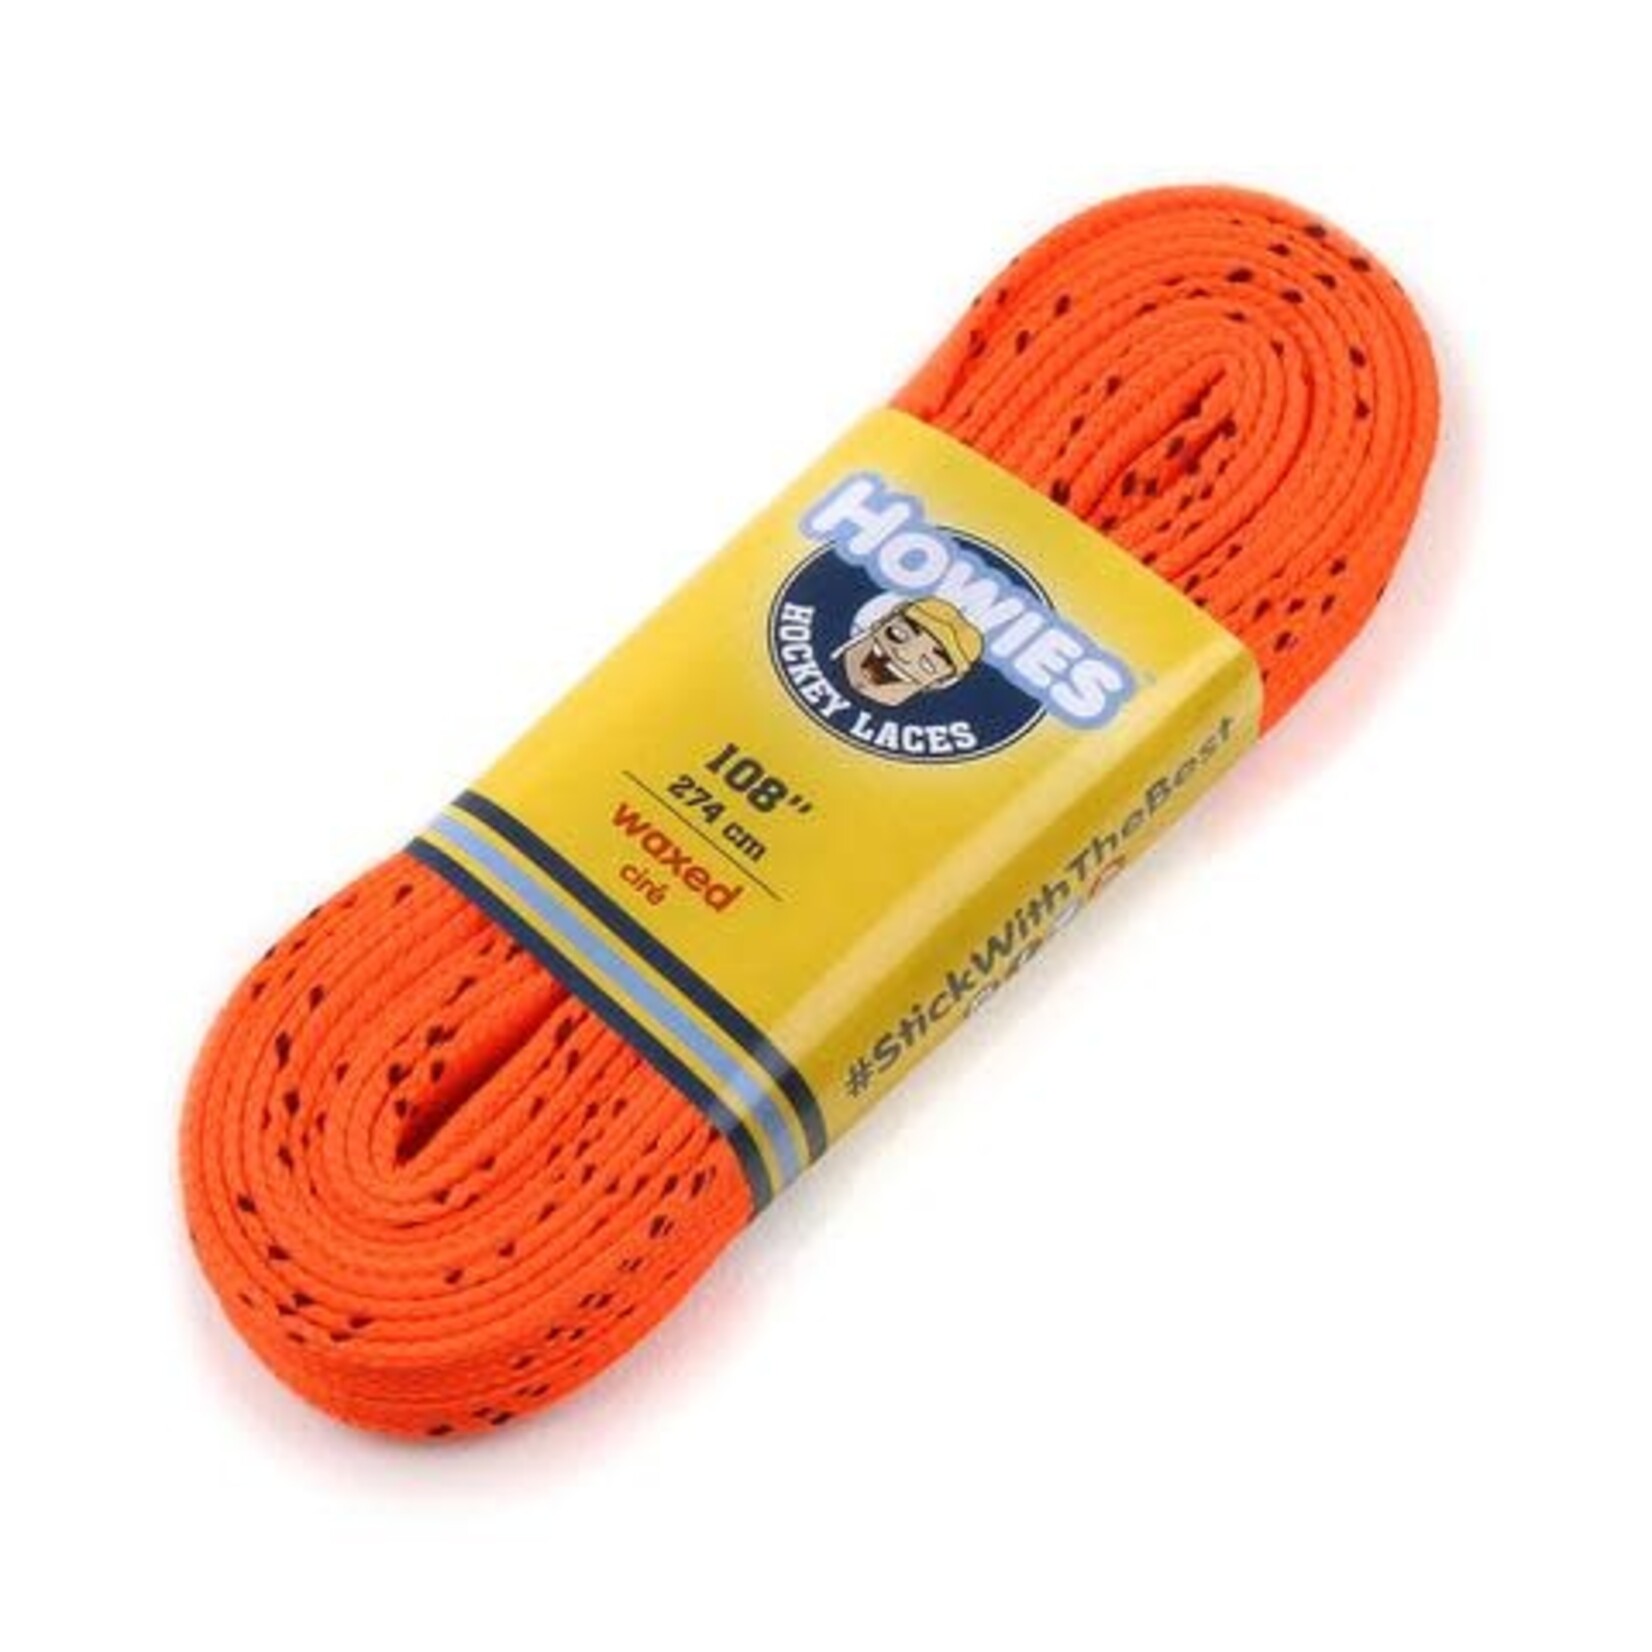 Howies Howies Hockey Skate Laces, Waxed